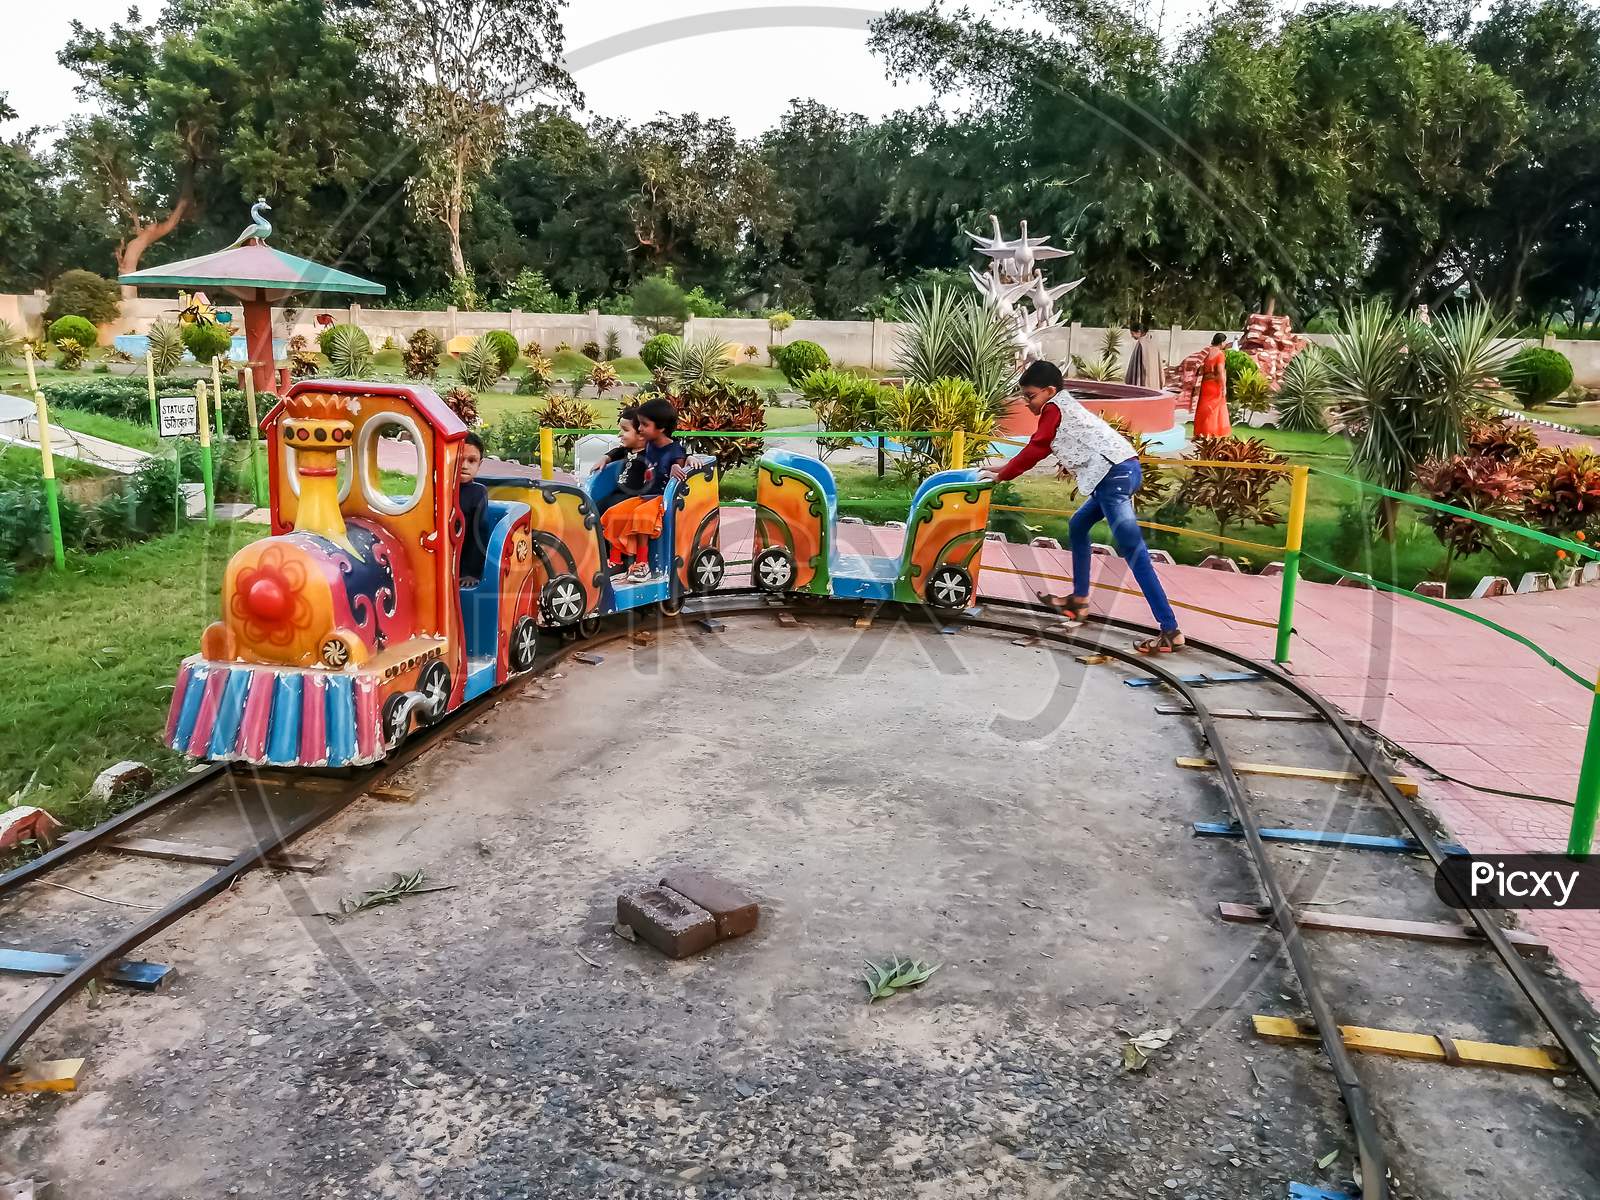 Kids are enjoying a Little toy at a Amusement park